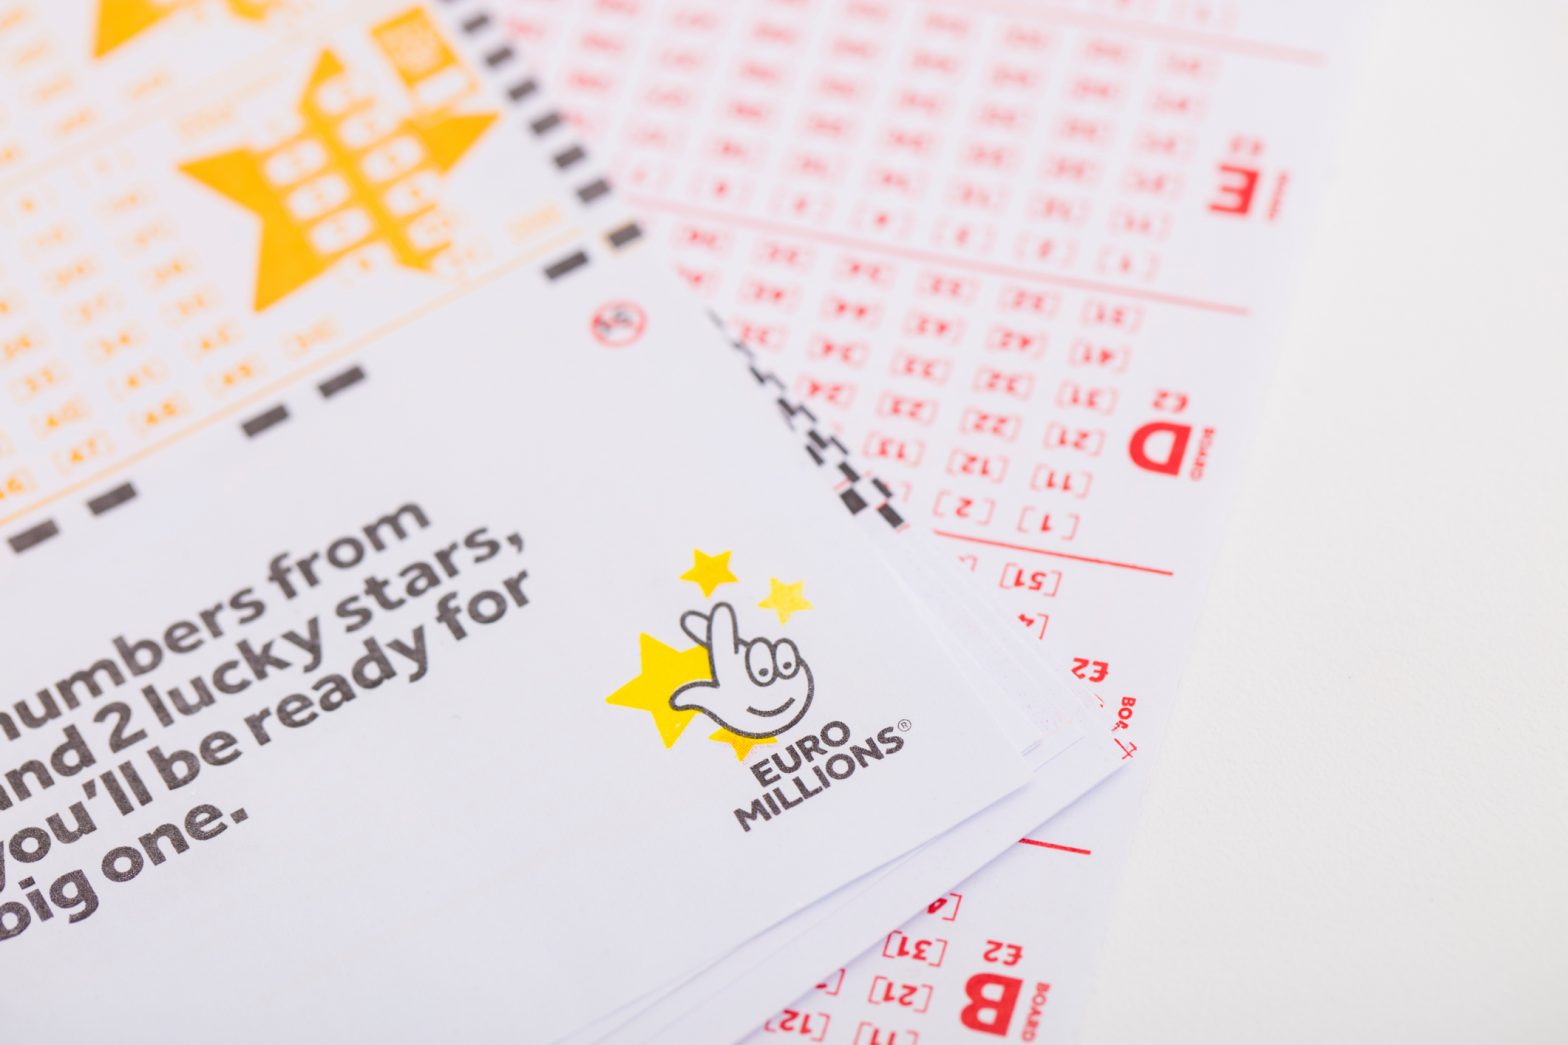 Euro Lottery paper ticket